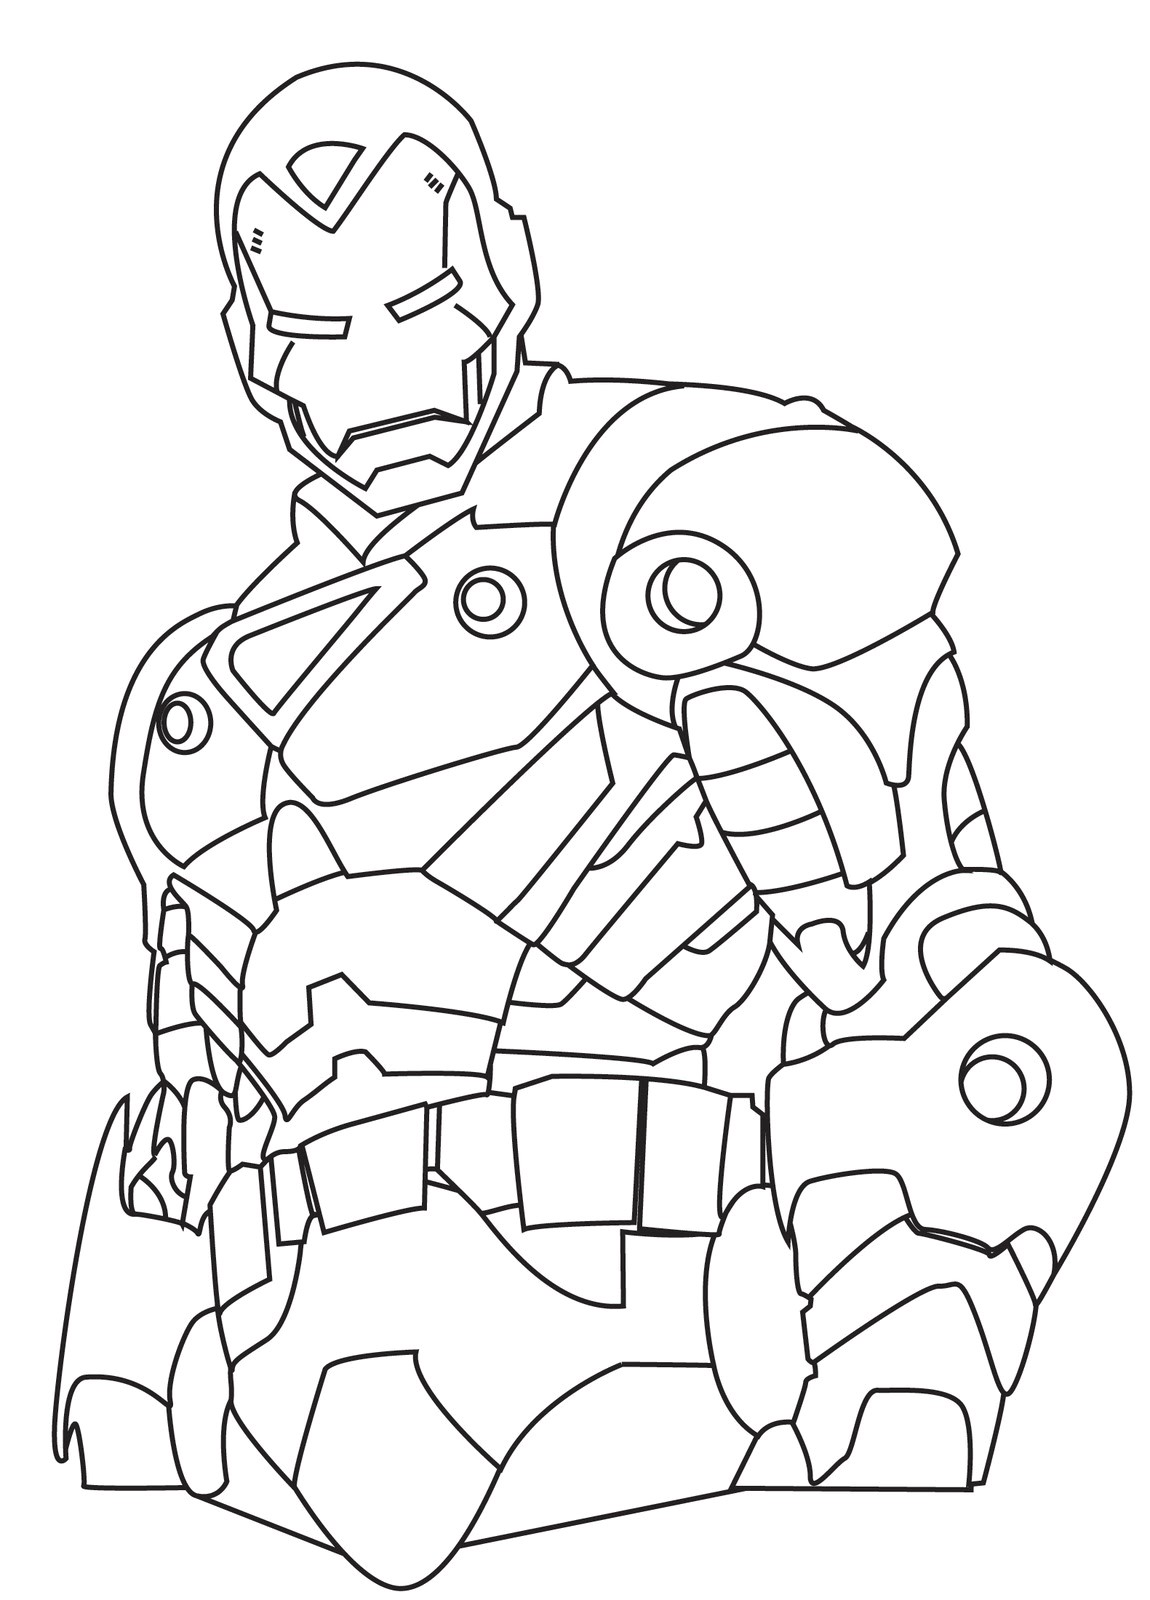 Iron Man Coloring Pages Printable Colouring Games Free For Kids To Print Lego At Ironman